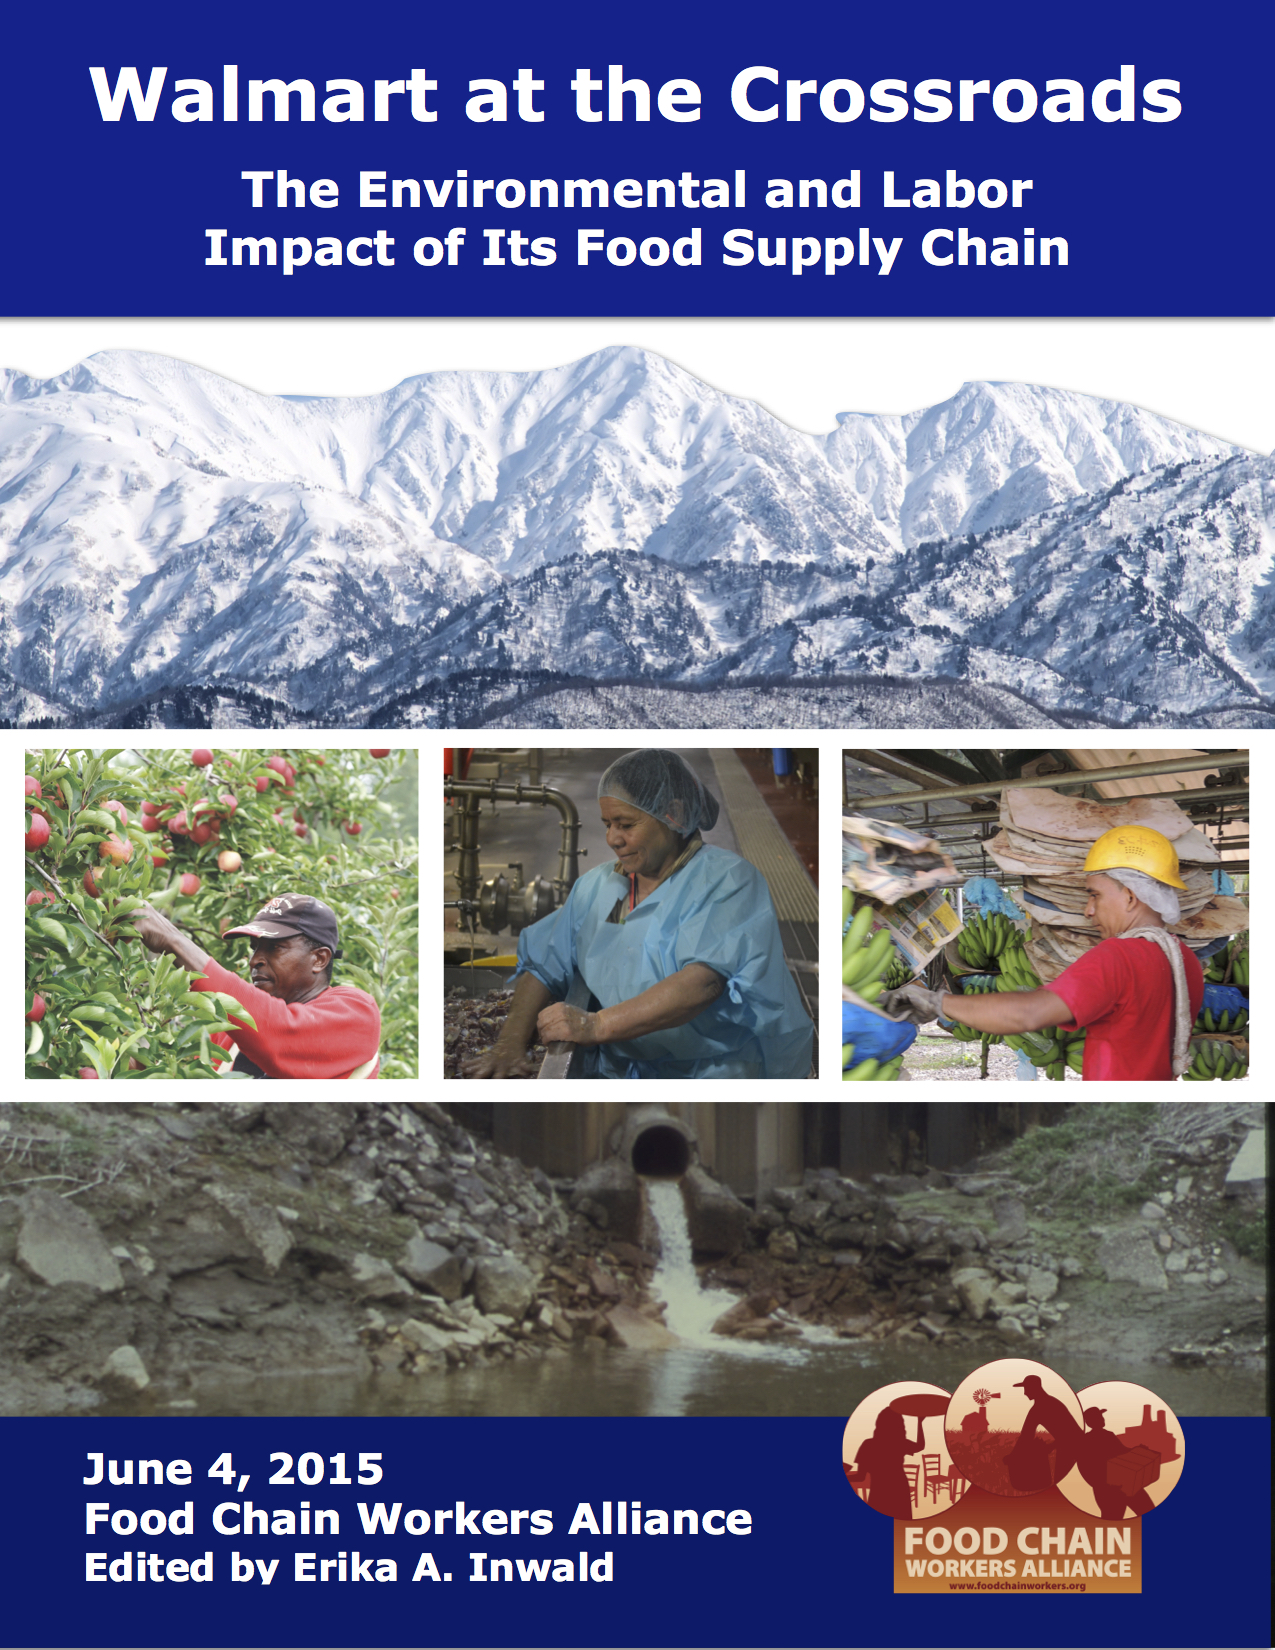 New Report Debunks Walmarts Claims of Sustainability and Fairness Along the Supply Chain